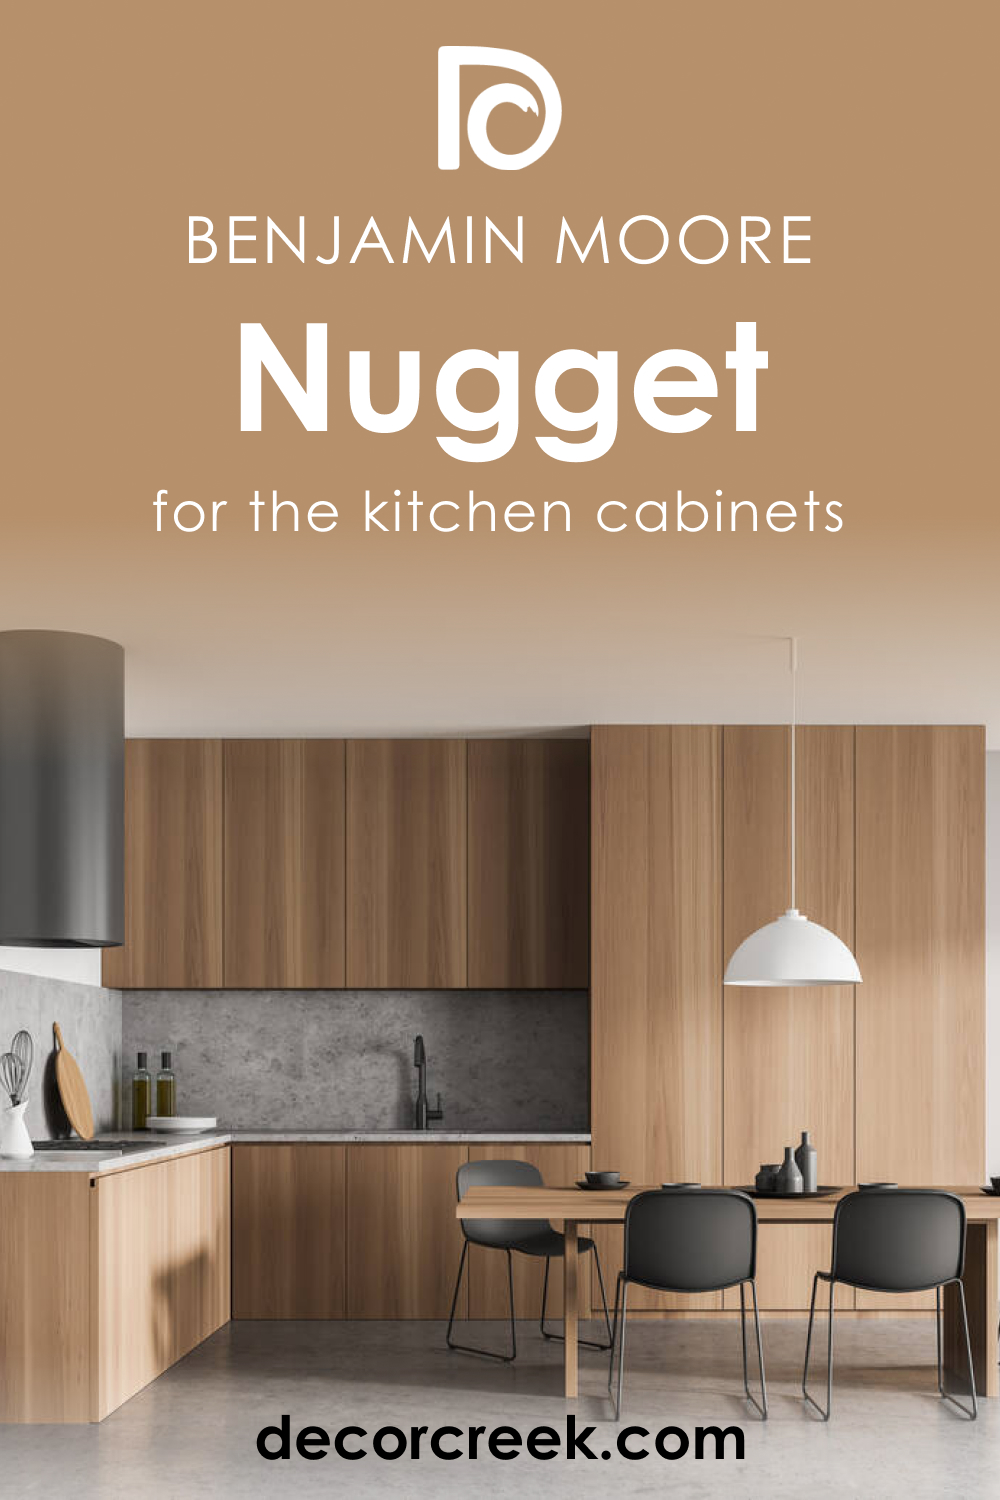 How to Use Nugget AC-9 on the Kitchen Cabinets?